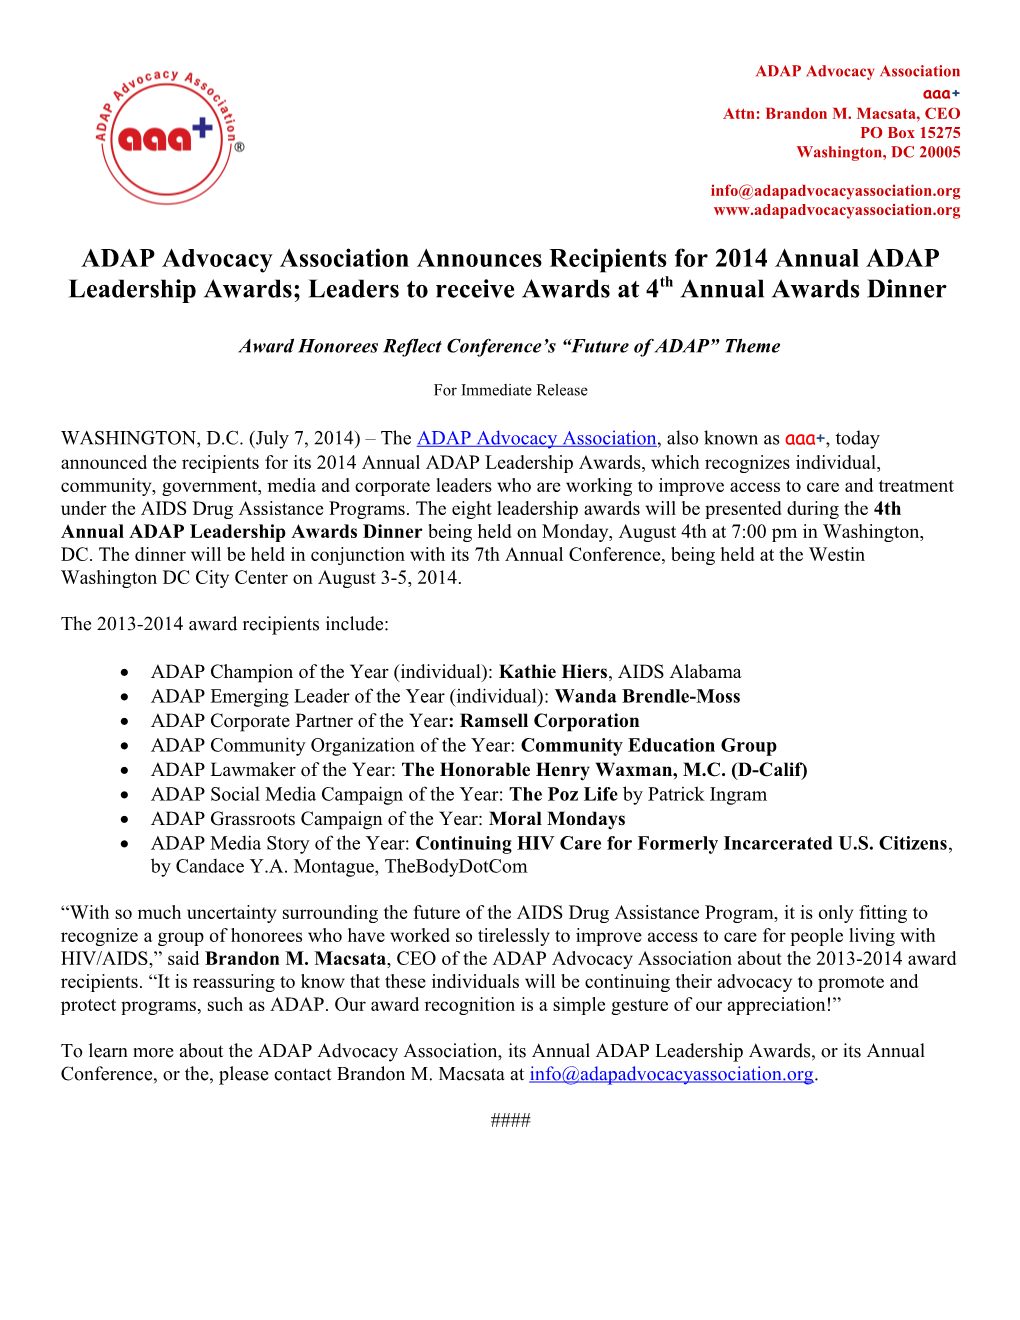 ADAP Advocacy Association February 7, 200 Page 2 of 2 ADAP ADVOCACY ASSOCIATION RECOGNIZES